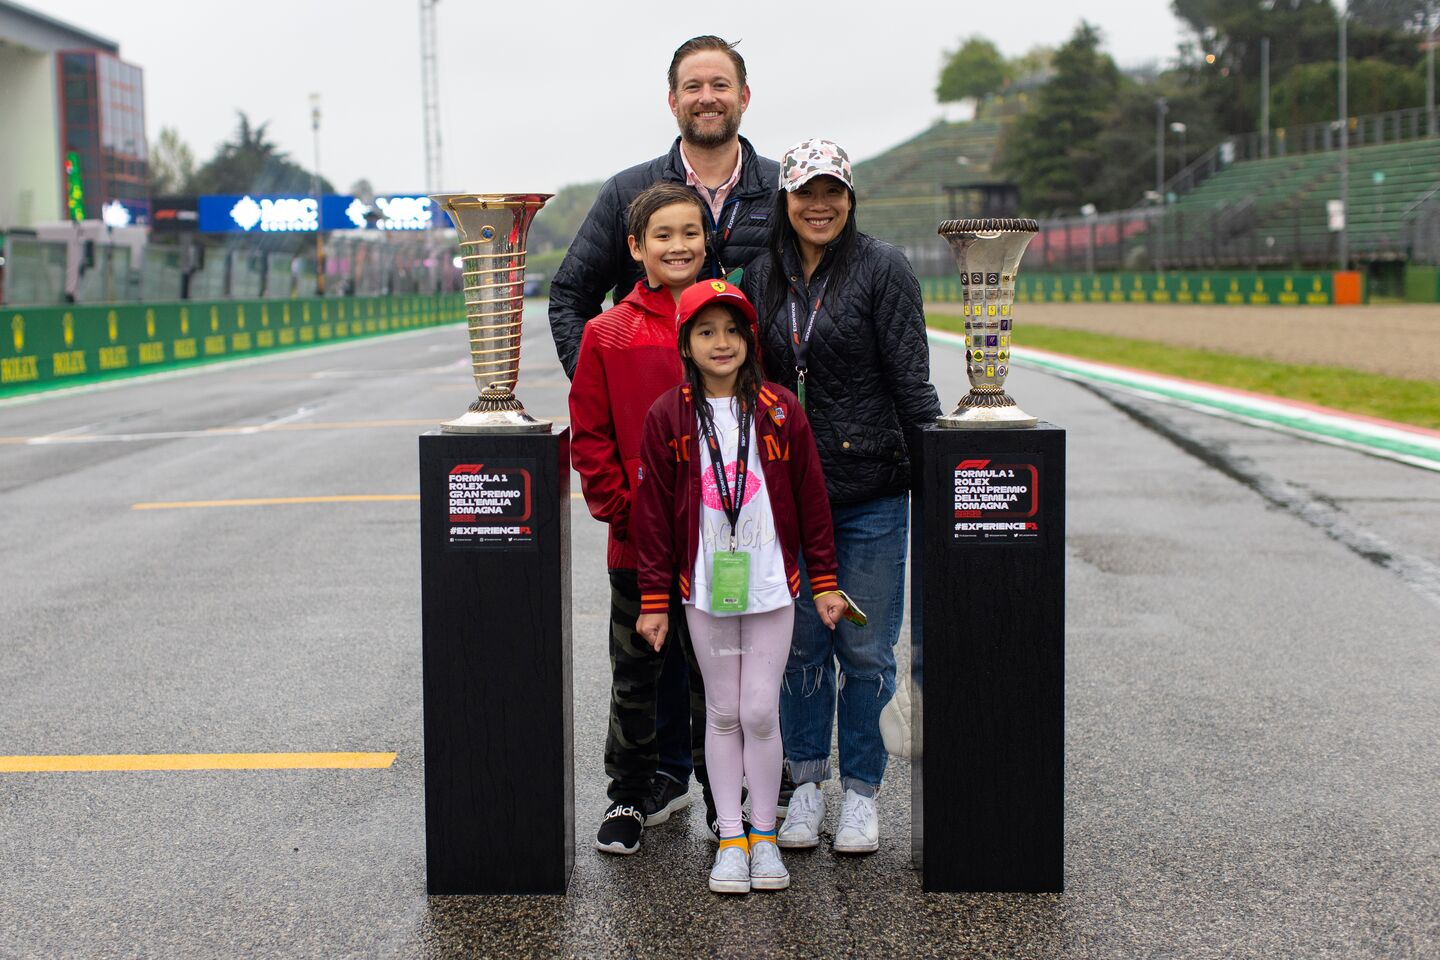 F1 trophy photo with fans